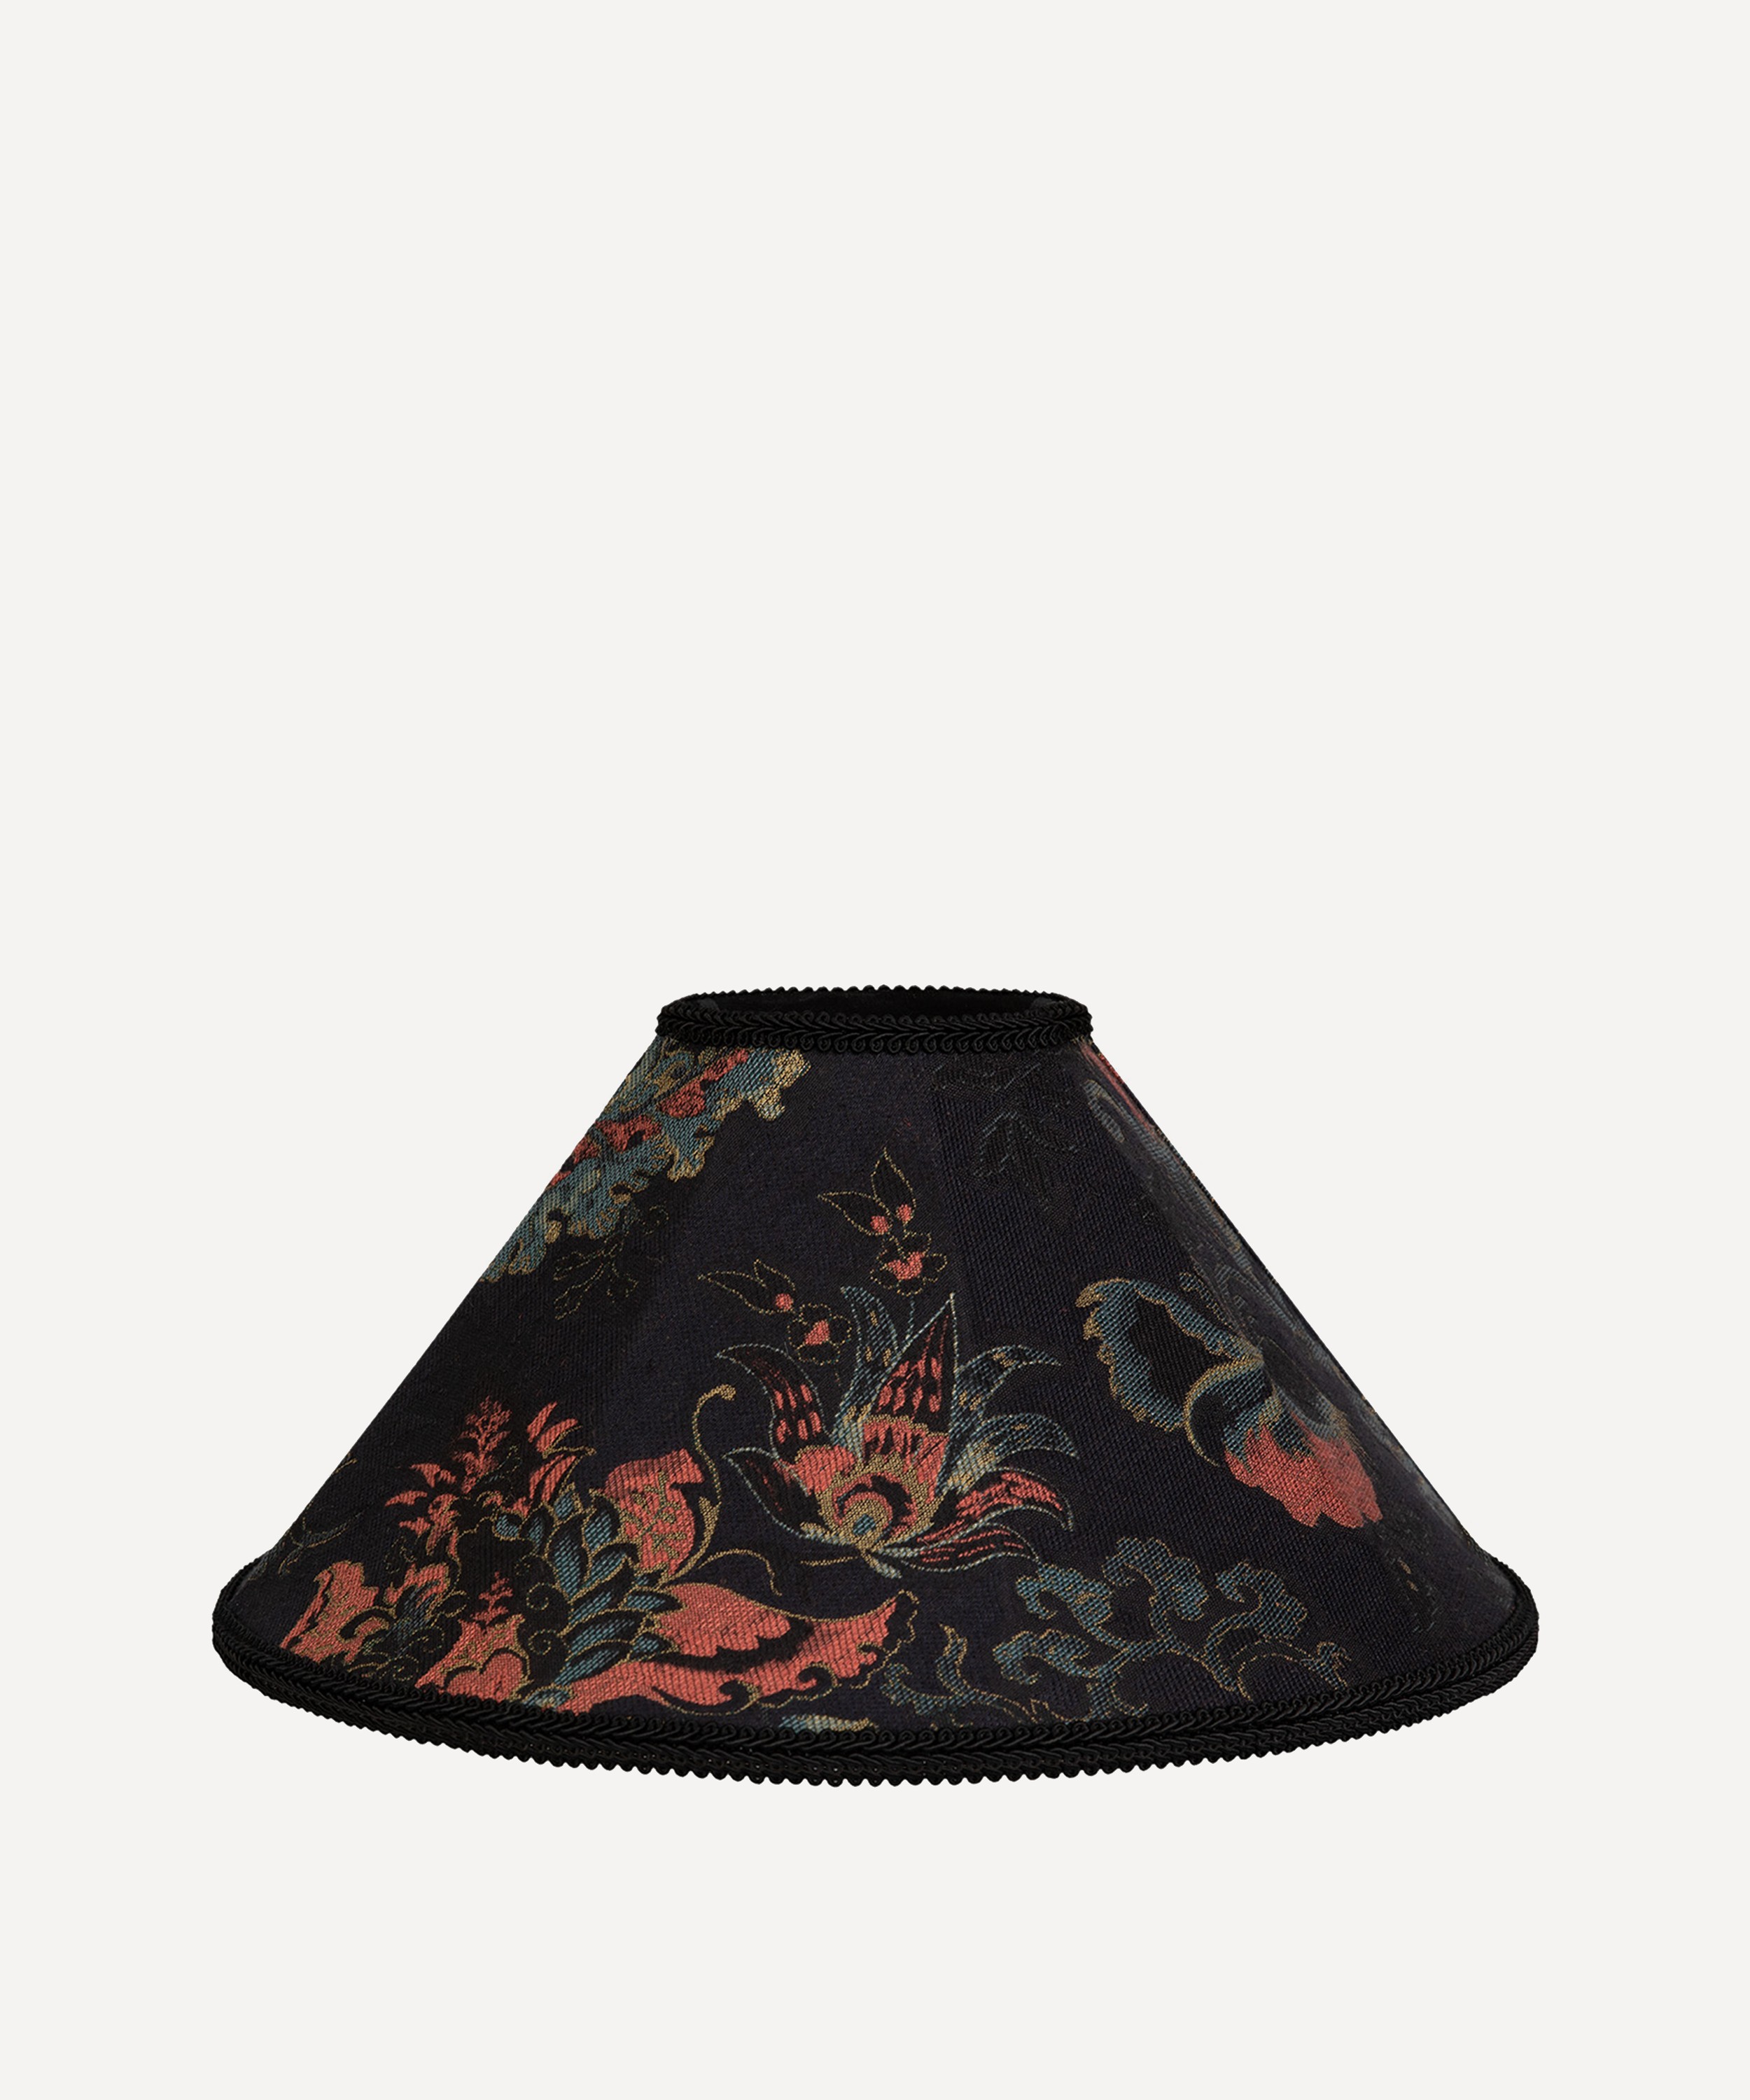 House of Hackney - Persephone Jacquard Romily Lampshade image number 0